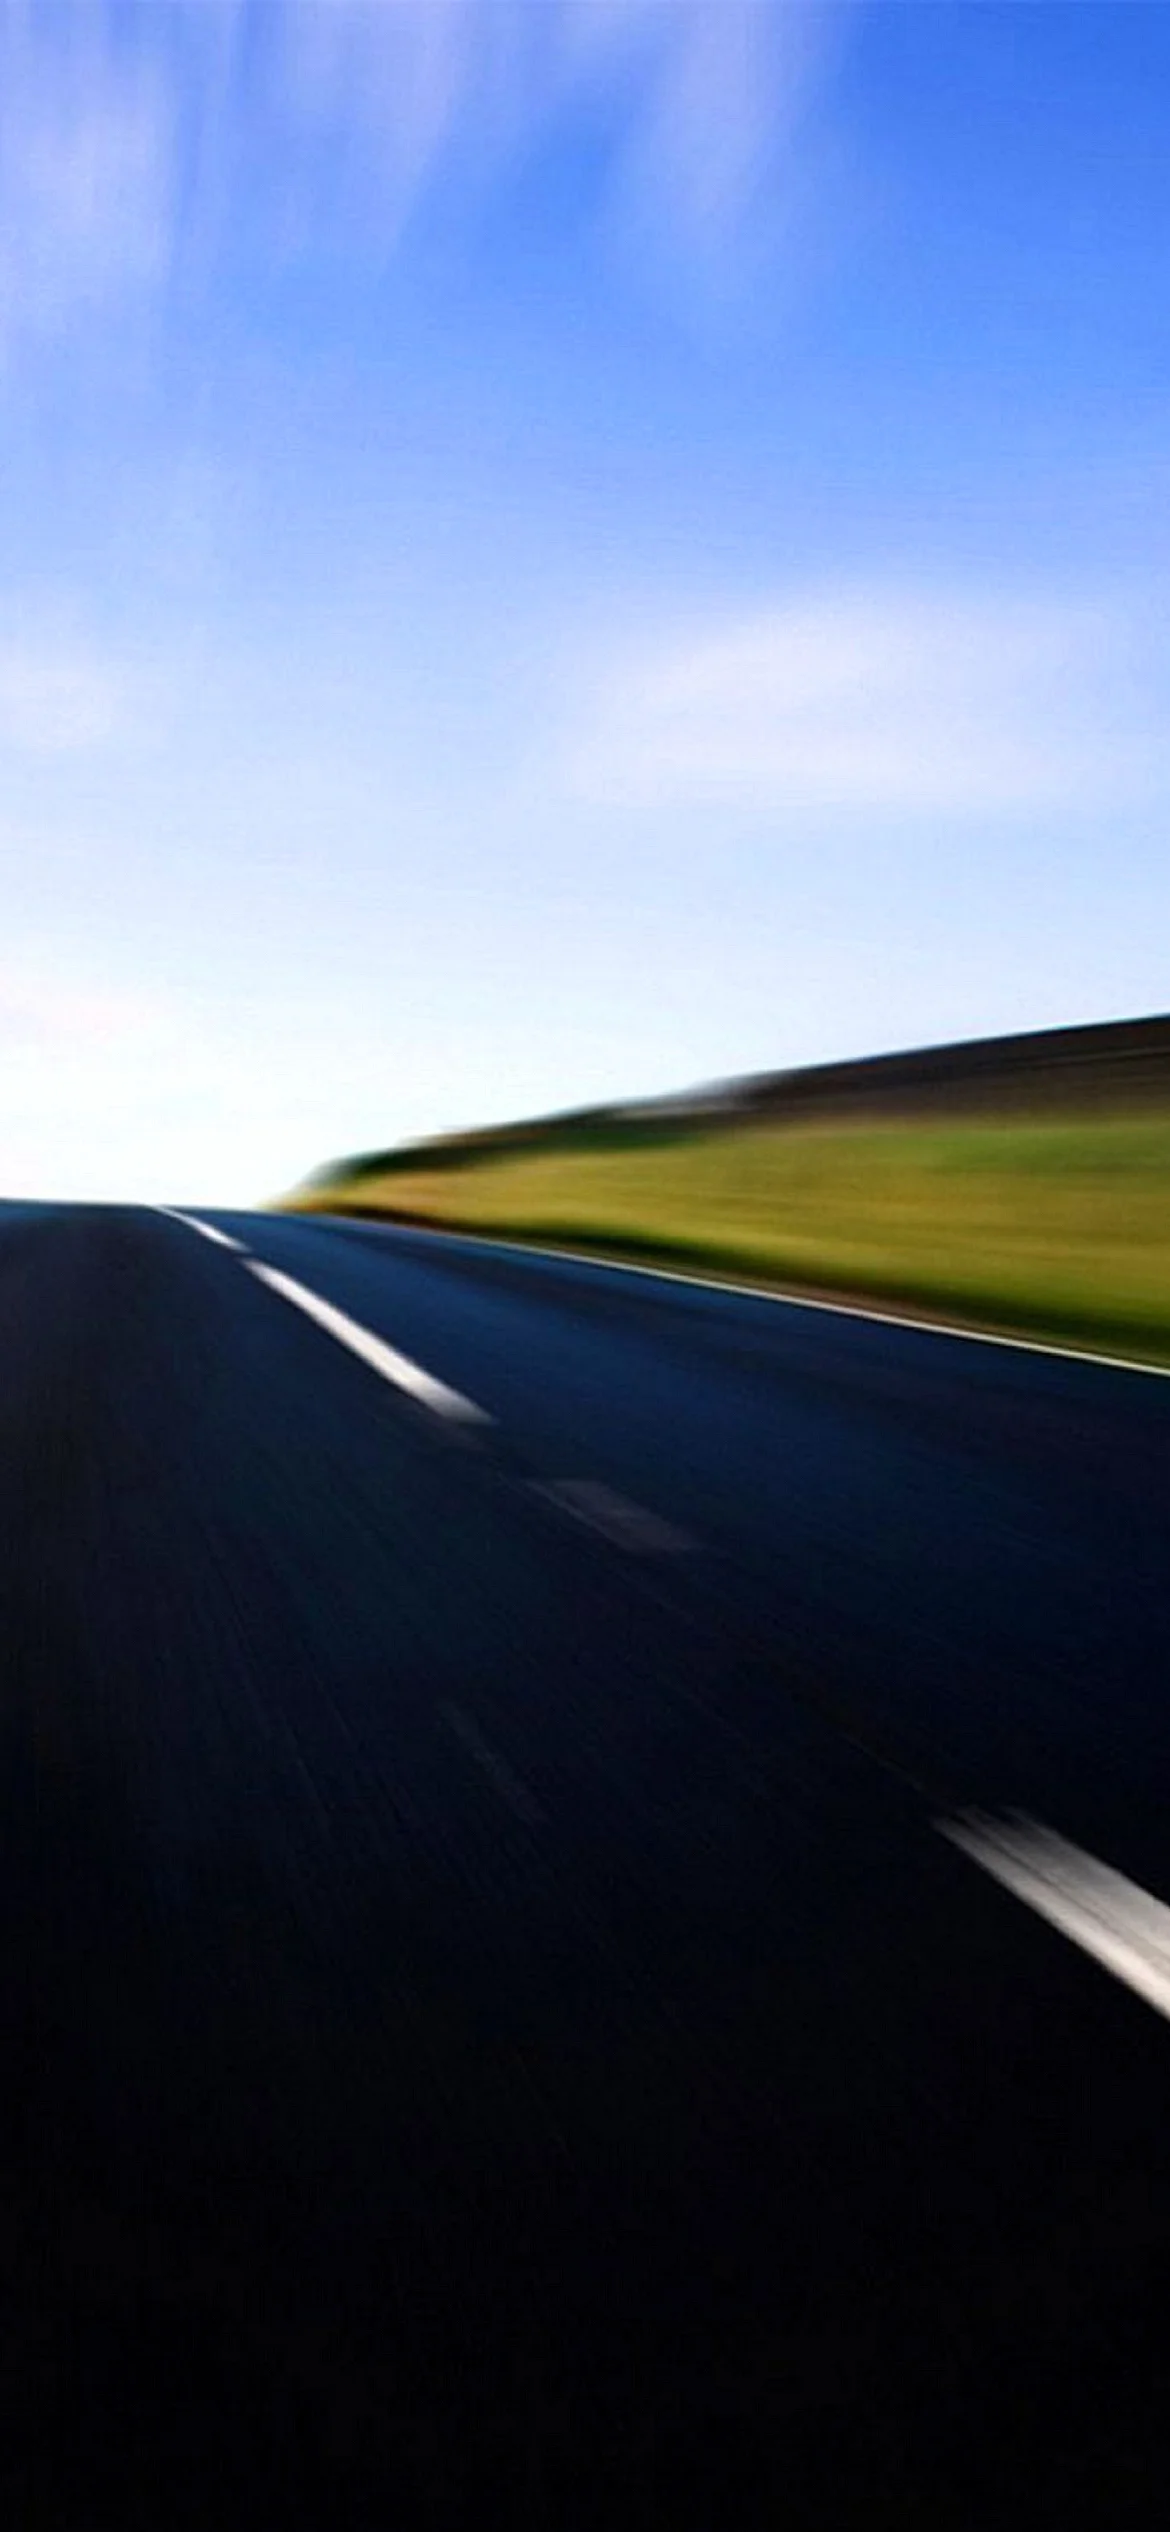 Motion Blur Road Wallpaper for iPhone 12